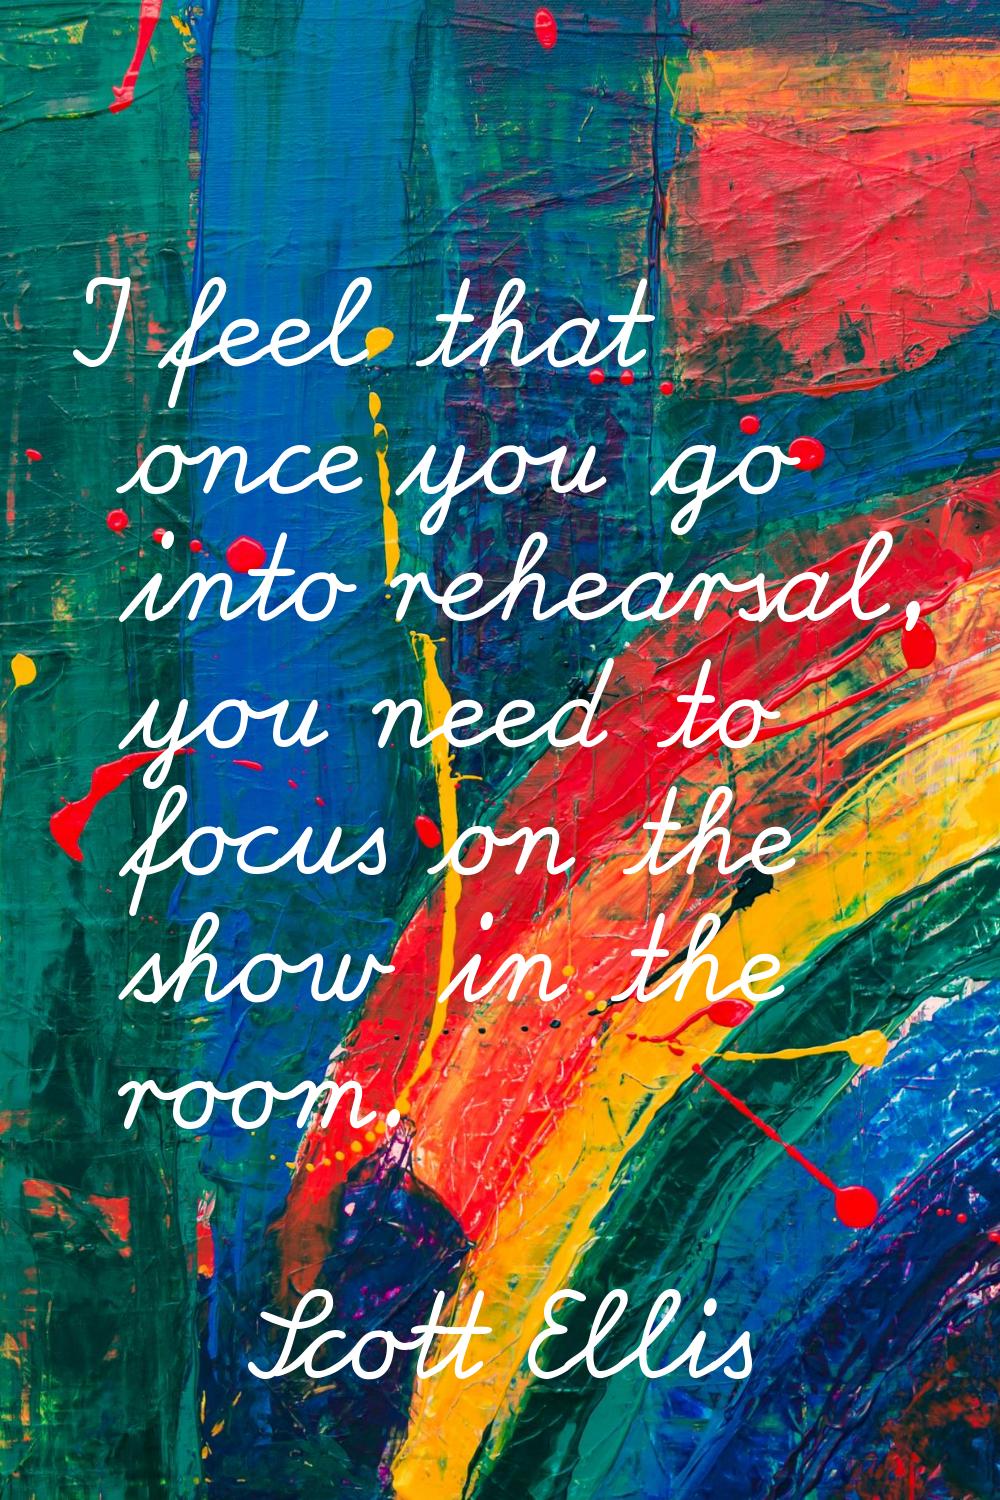 I feel that once you go into rehearsal, you need to focus on the show in the room.